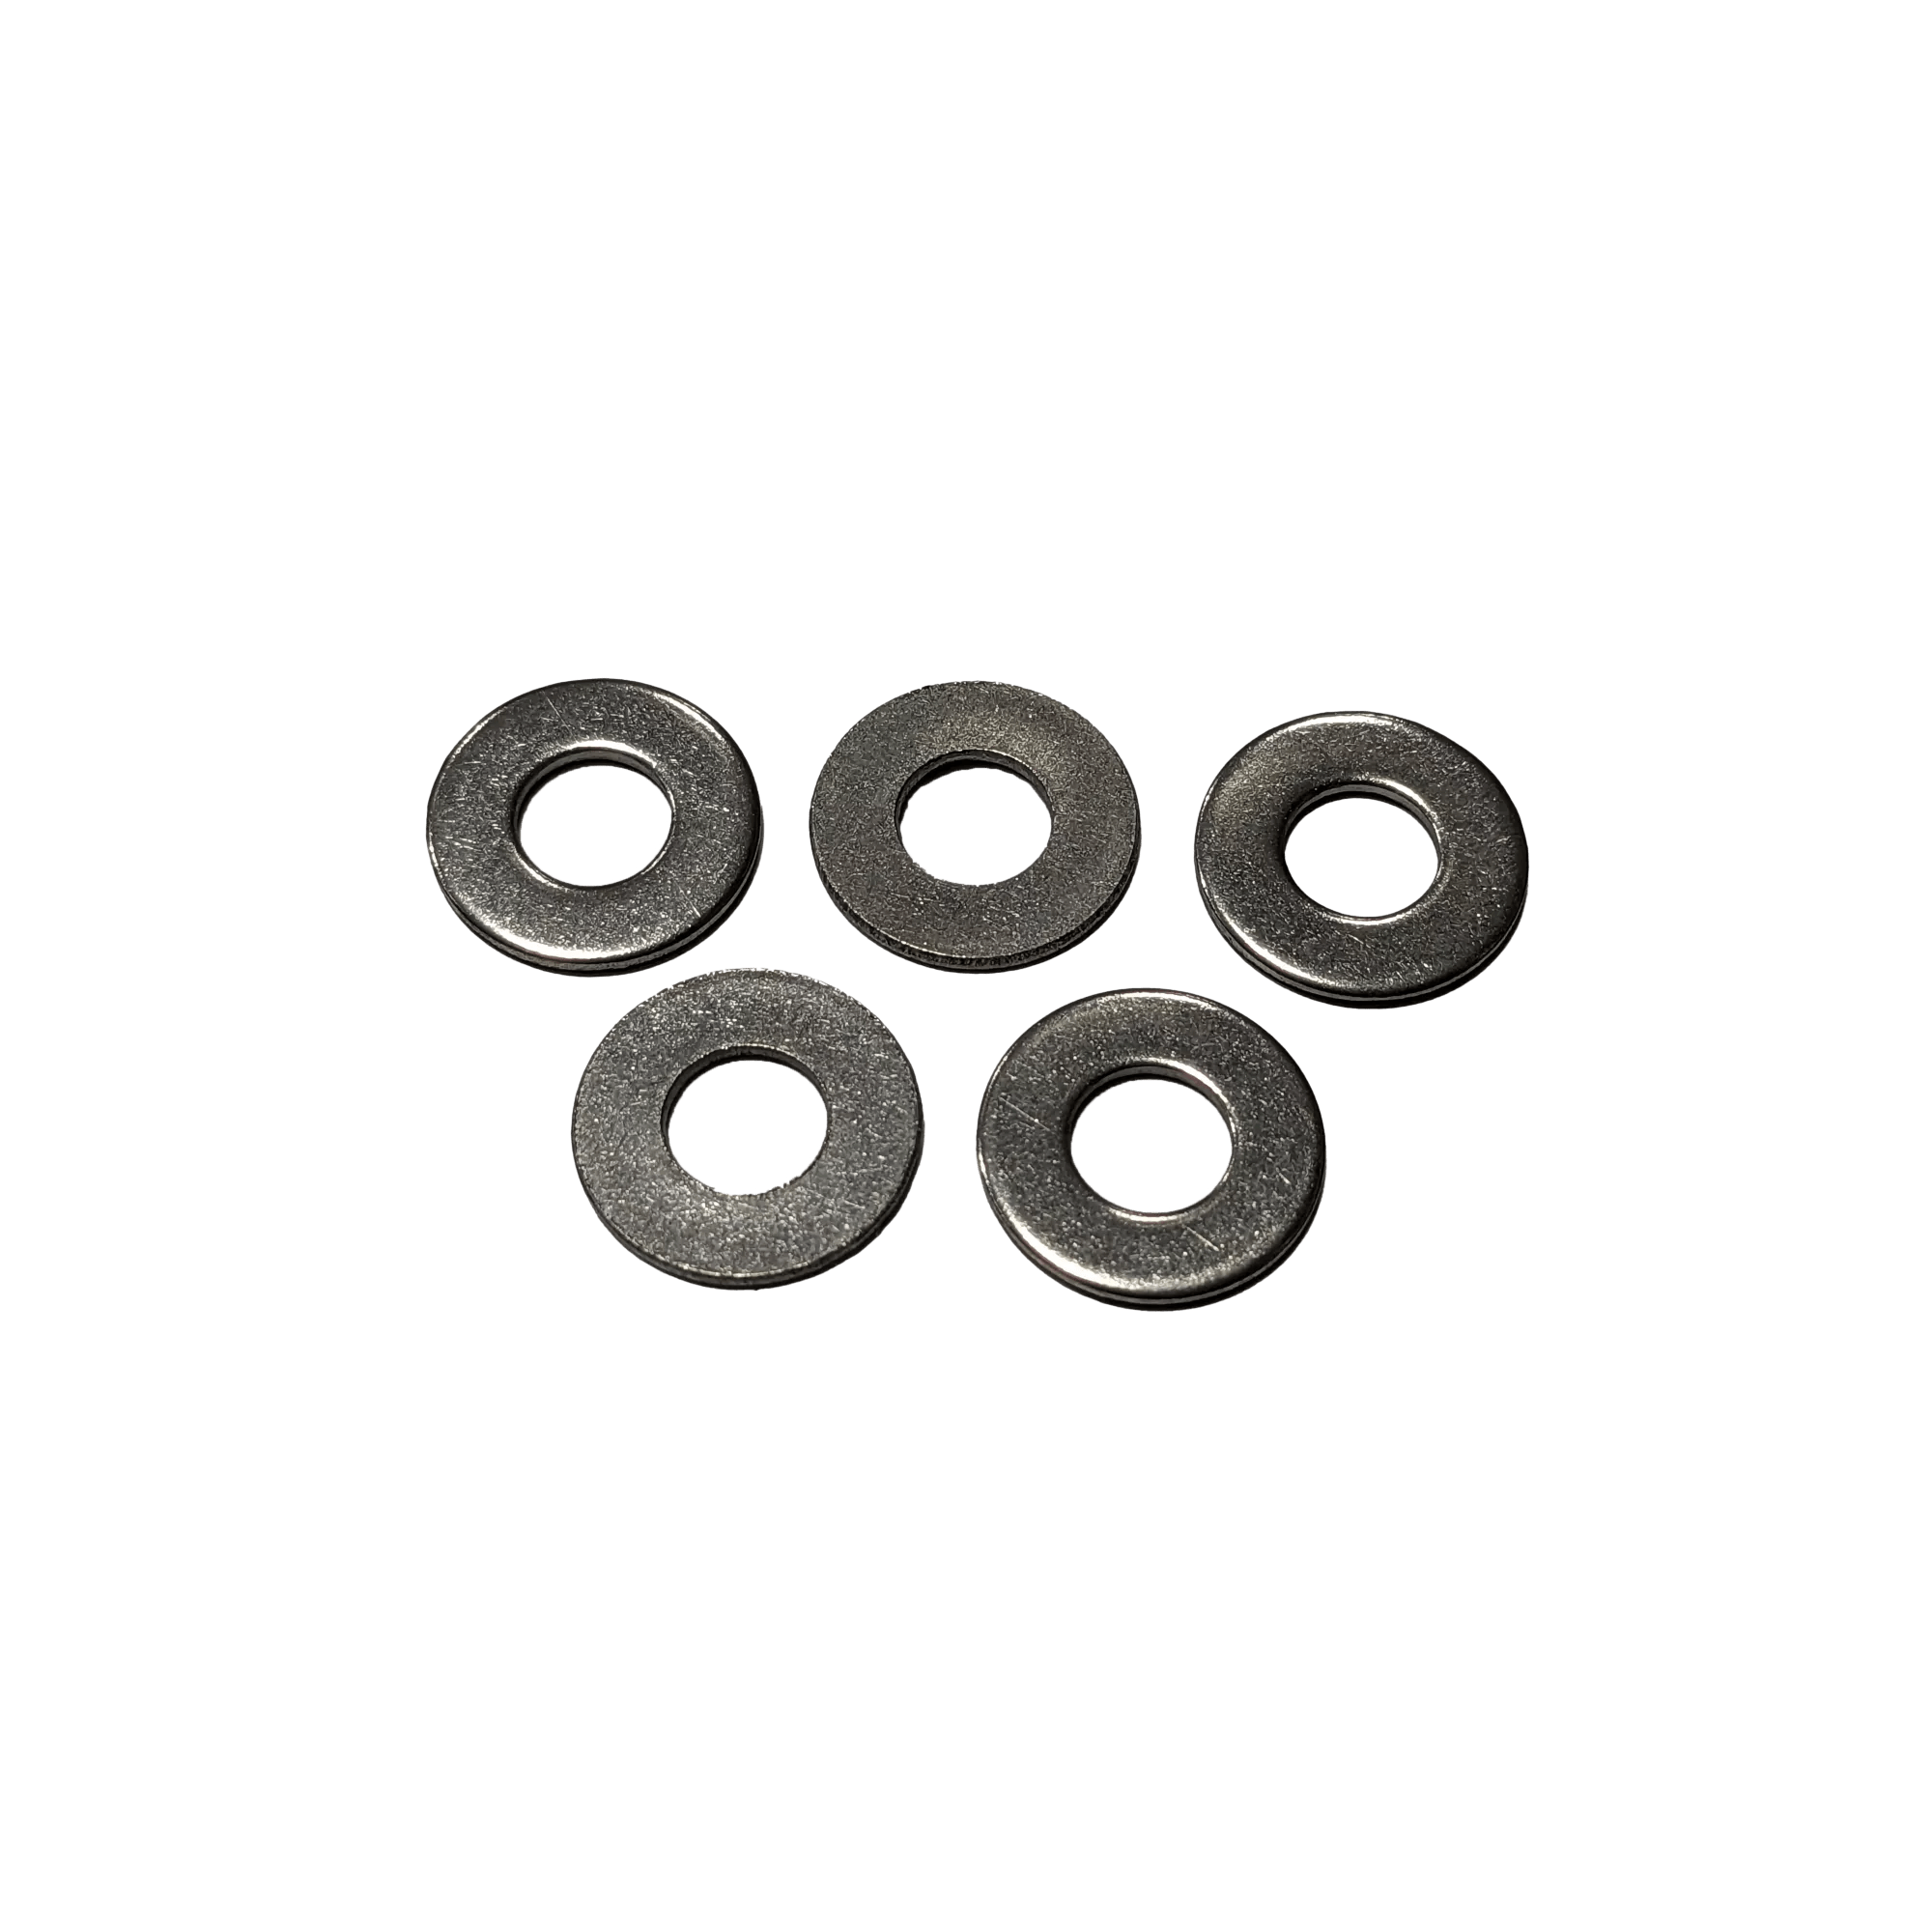 WILDERNESS SYSTEMS - Stainless Steel Flat Washer 1/4 In. - 5 Pack -  - 9800348 - 